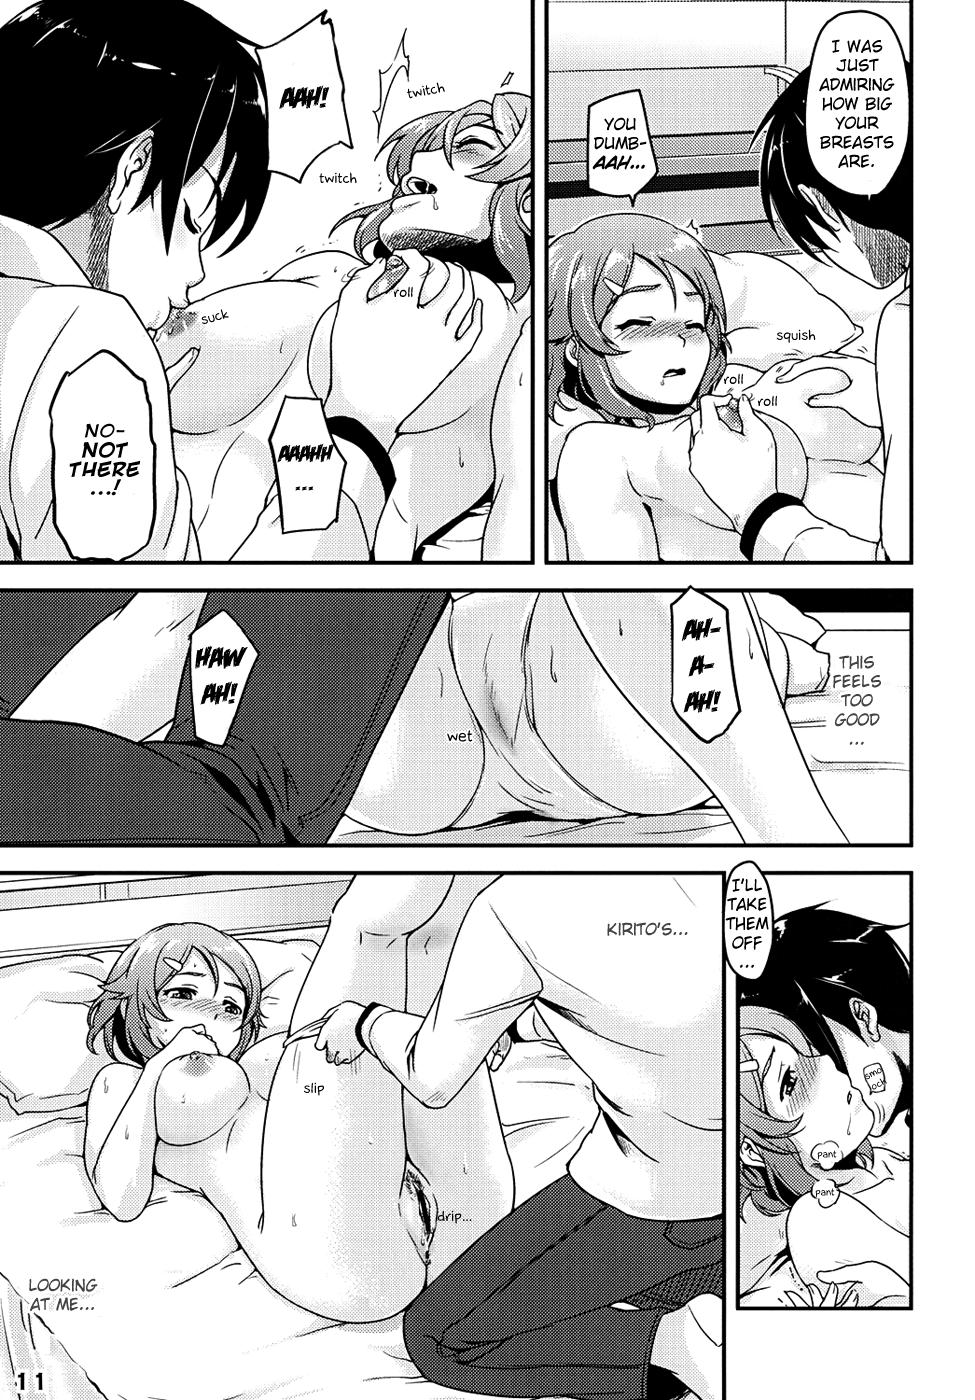 Free Fucking RIZ ROUND2 - Sword art online Young Petite Porn - Page 11